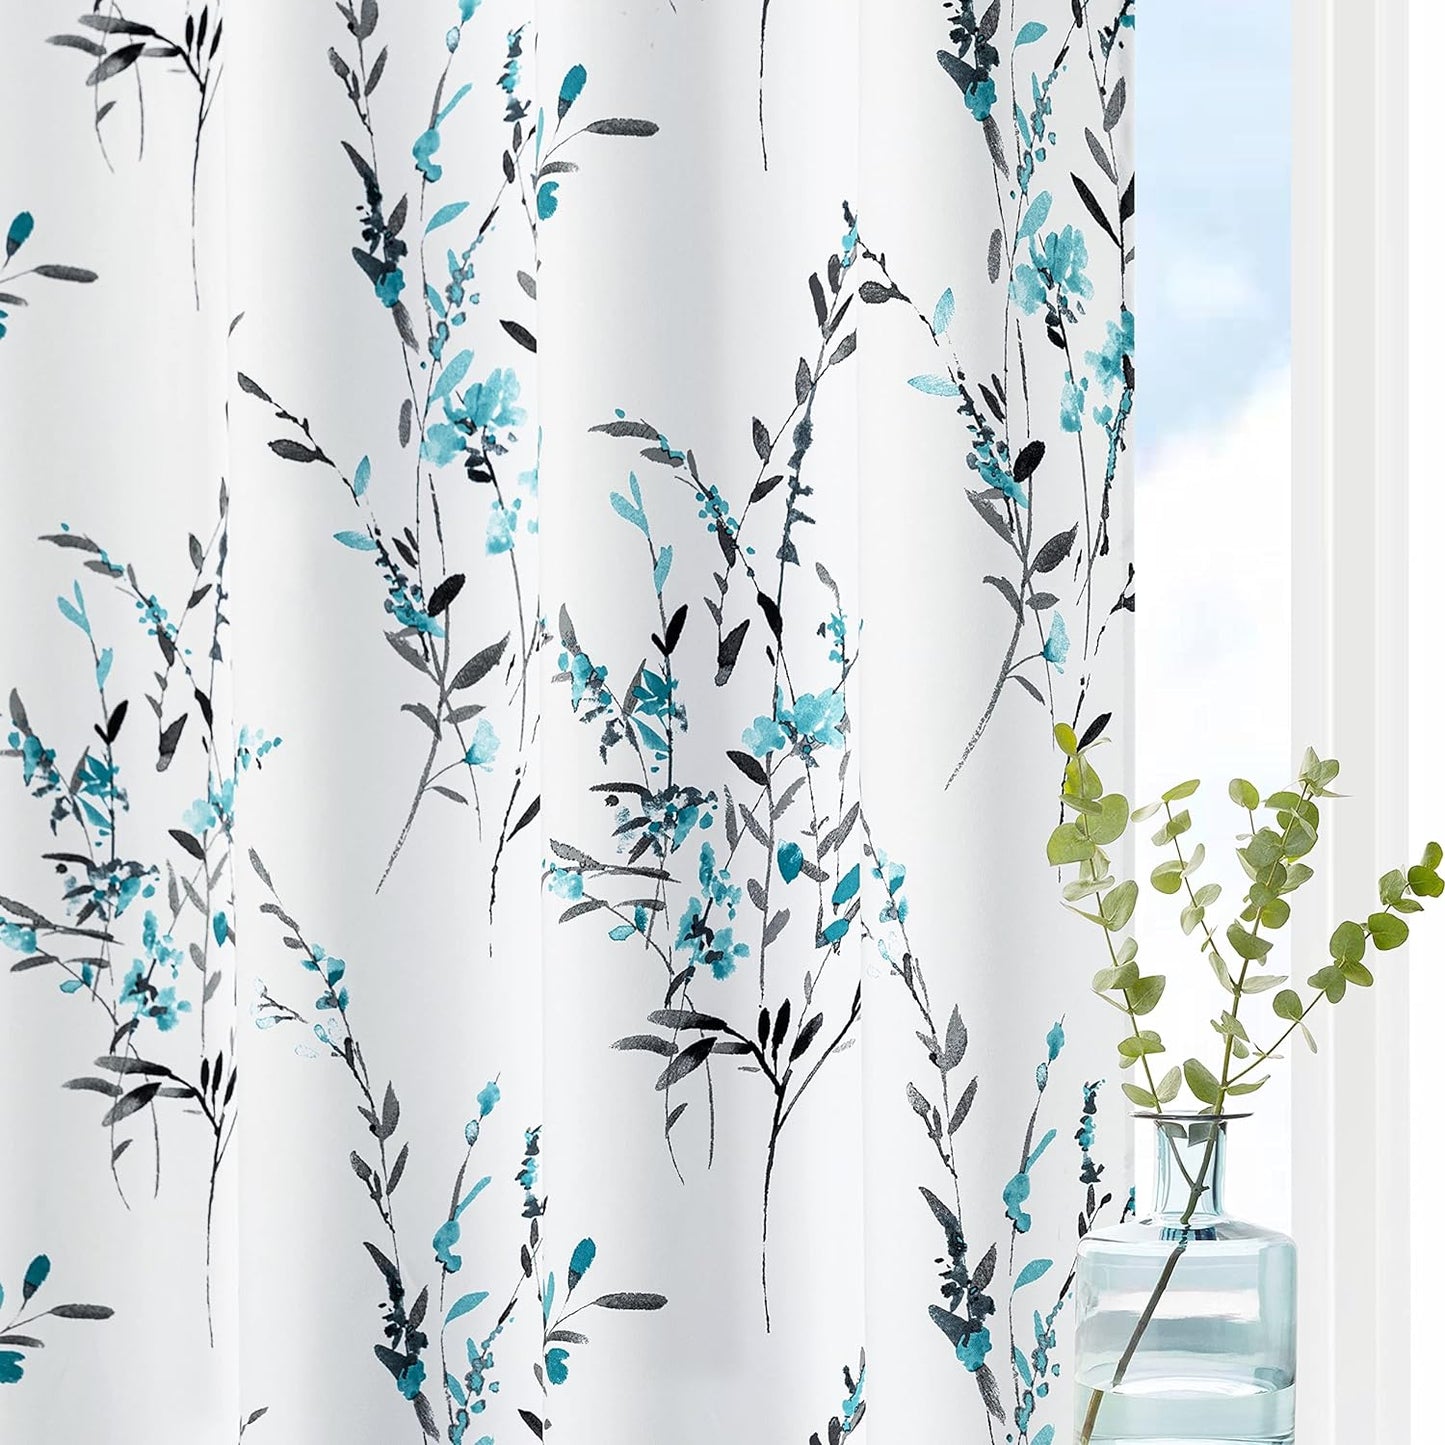 MYSKY HOME Living Room Curtains 84 Inches Long Floral Curtains Light Filtering Thermal Insulated Soft for Dining Room Farmhouse Leaf Grommet Curtains Home Decoration, Set of 2 Panels, Navy Blue  MYSKYTEX B-Teal 52"W X 108"L 